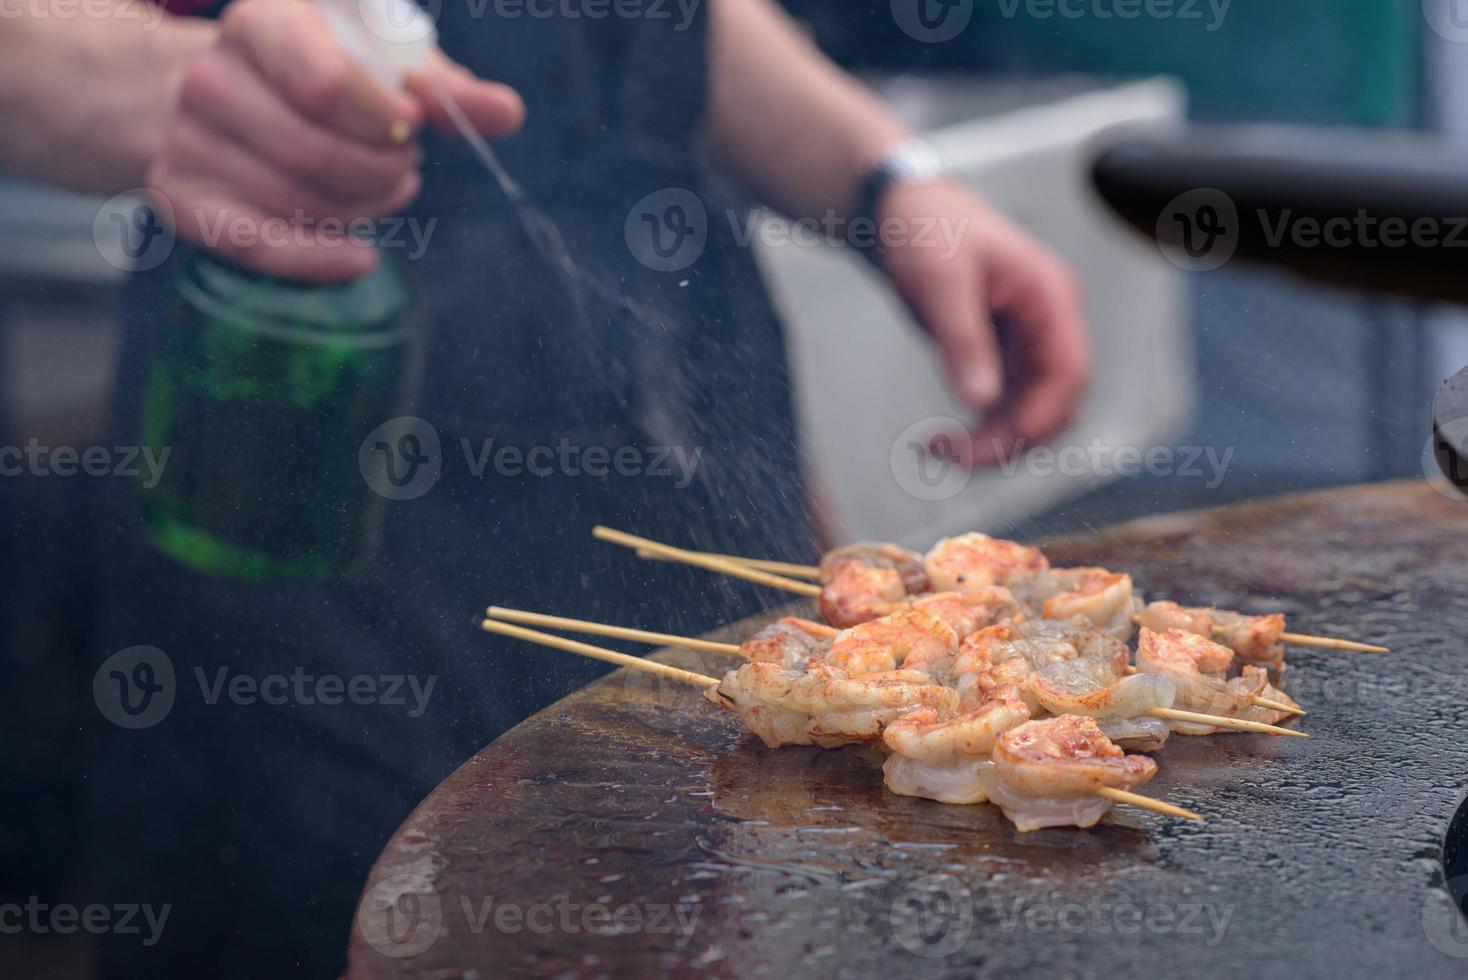 Cooking shrimp, prawn skewers on grill at street food festival - close up photo